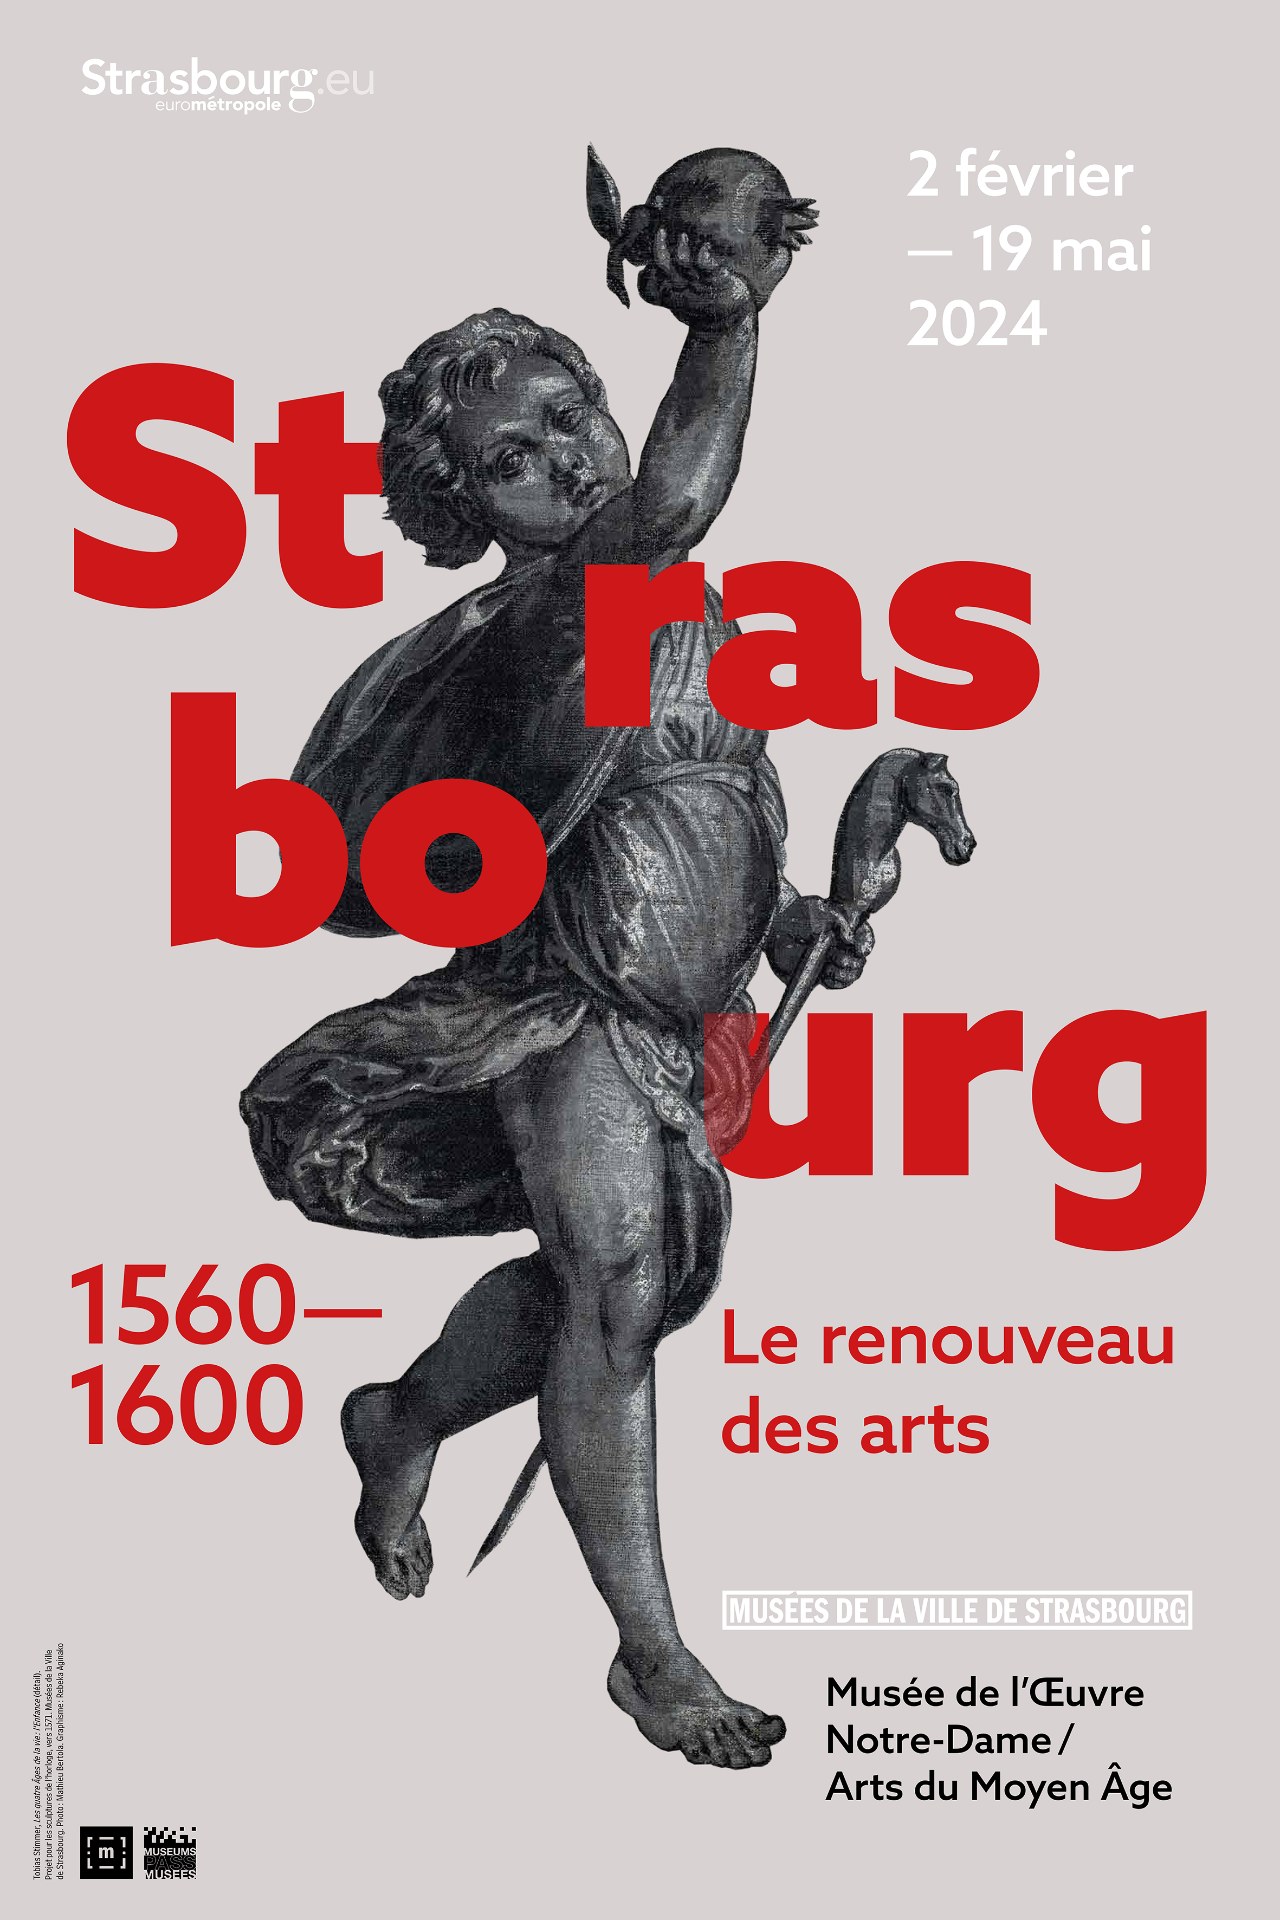 Strasbourg 1560-1600. The renewal of the arts